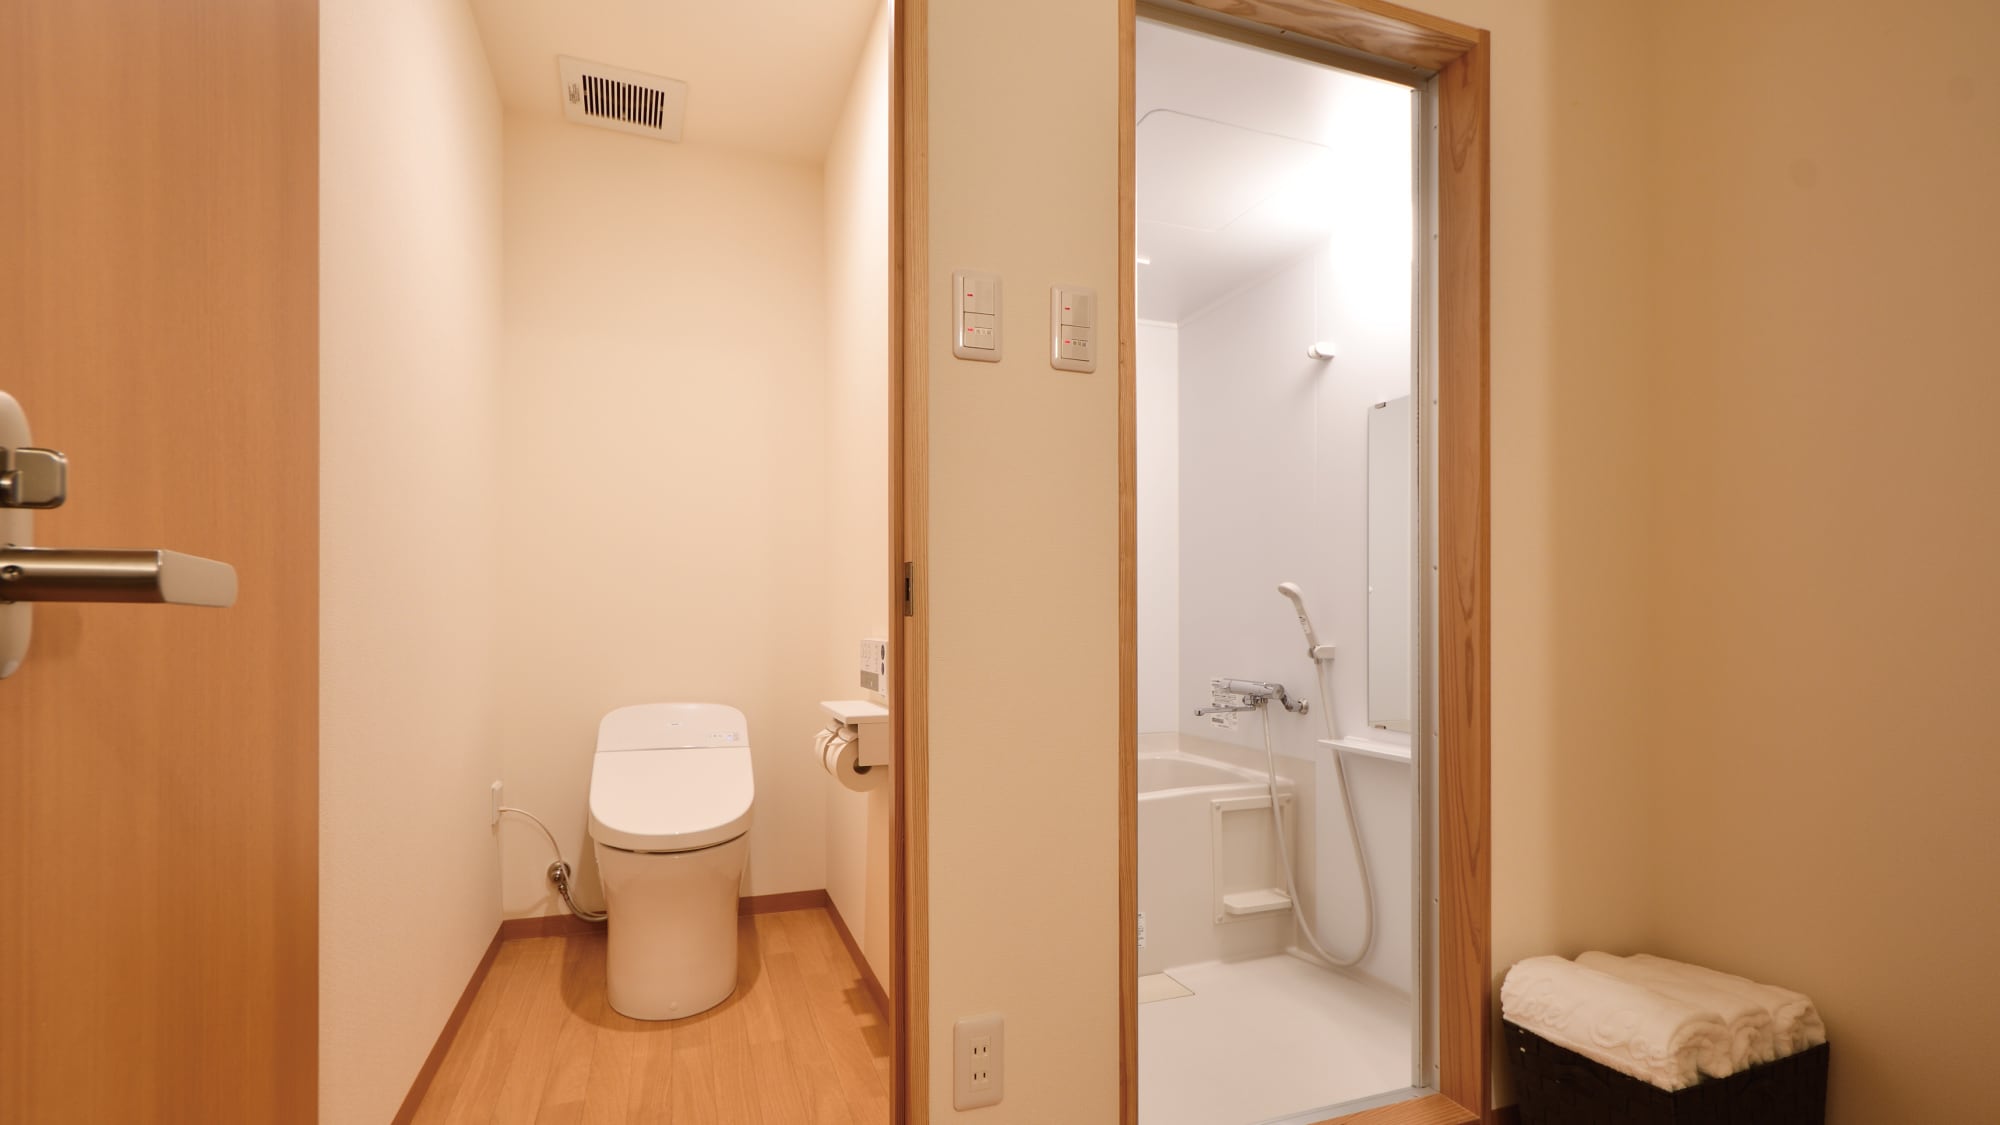 The Japanese-style room has a separate bath and toilet!